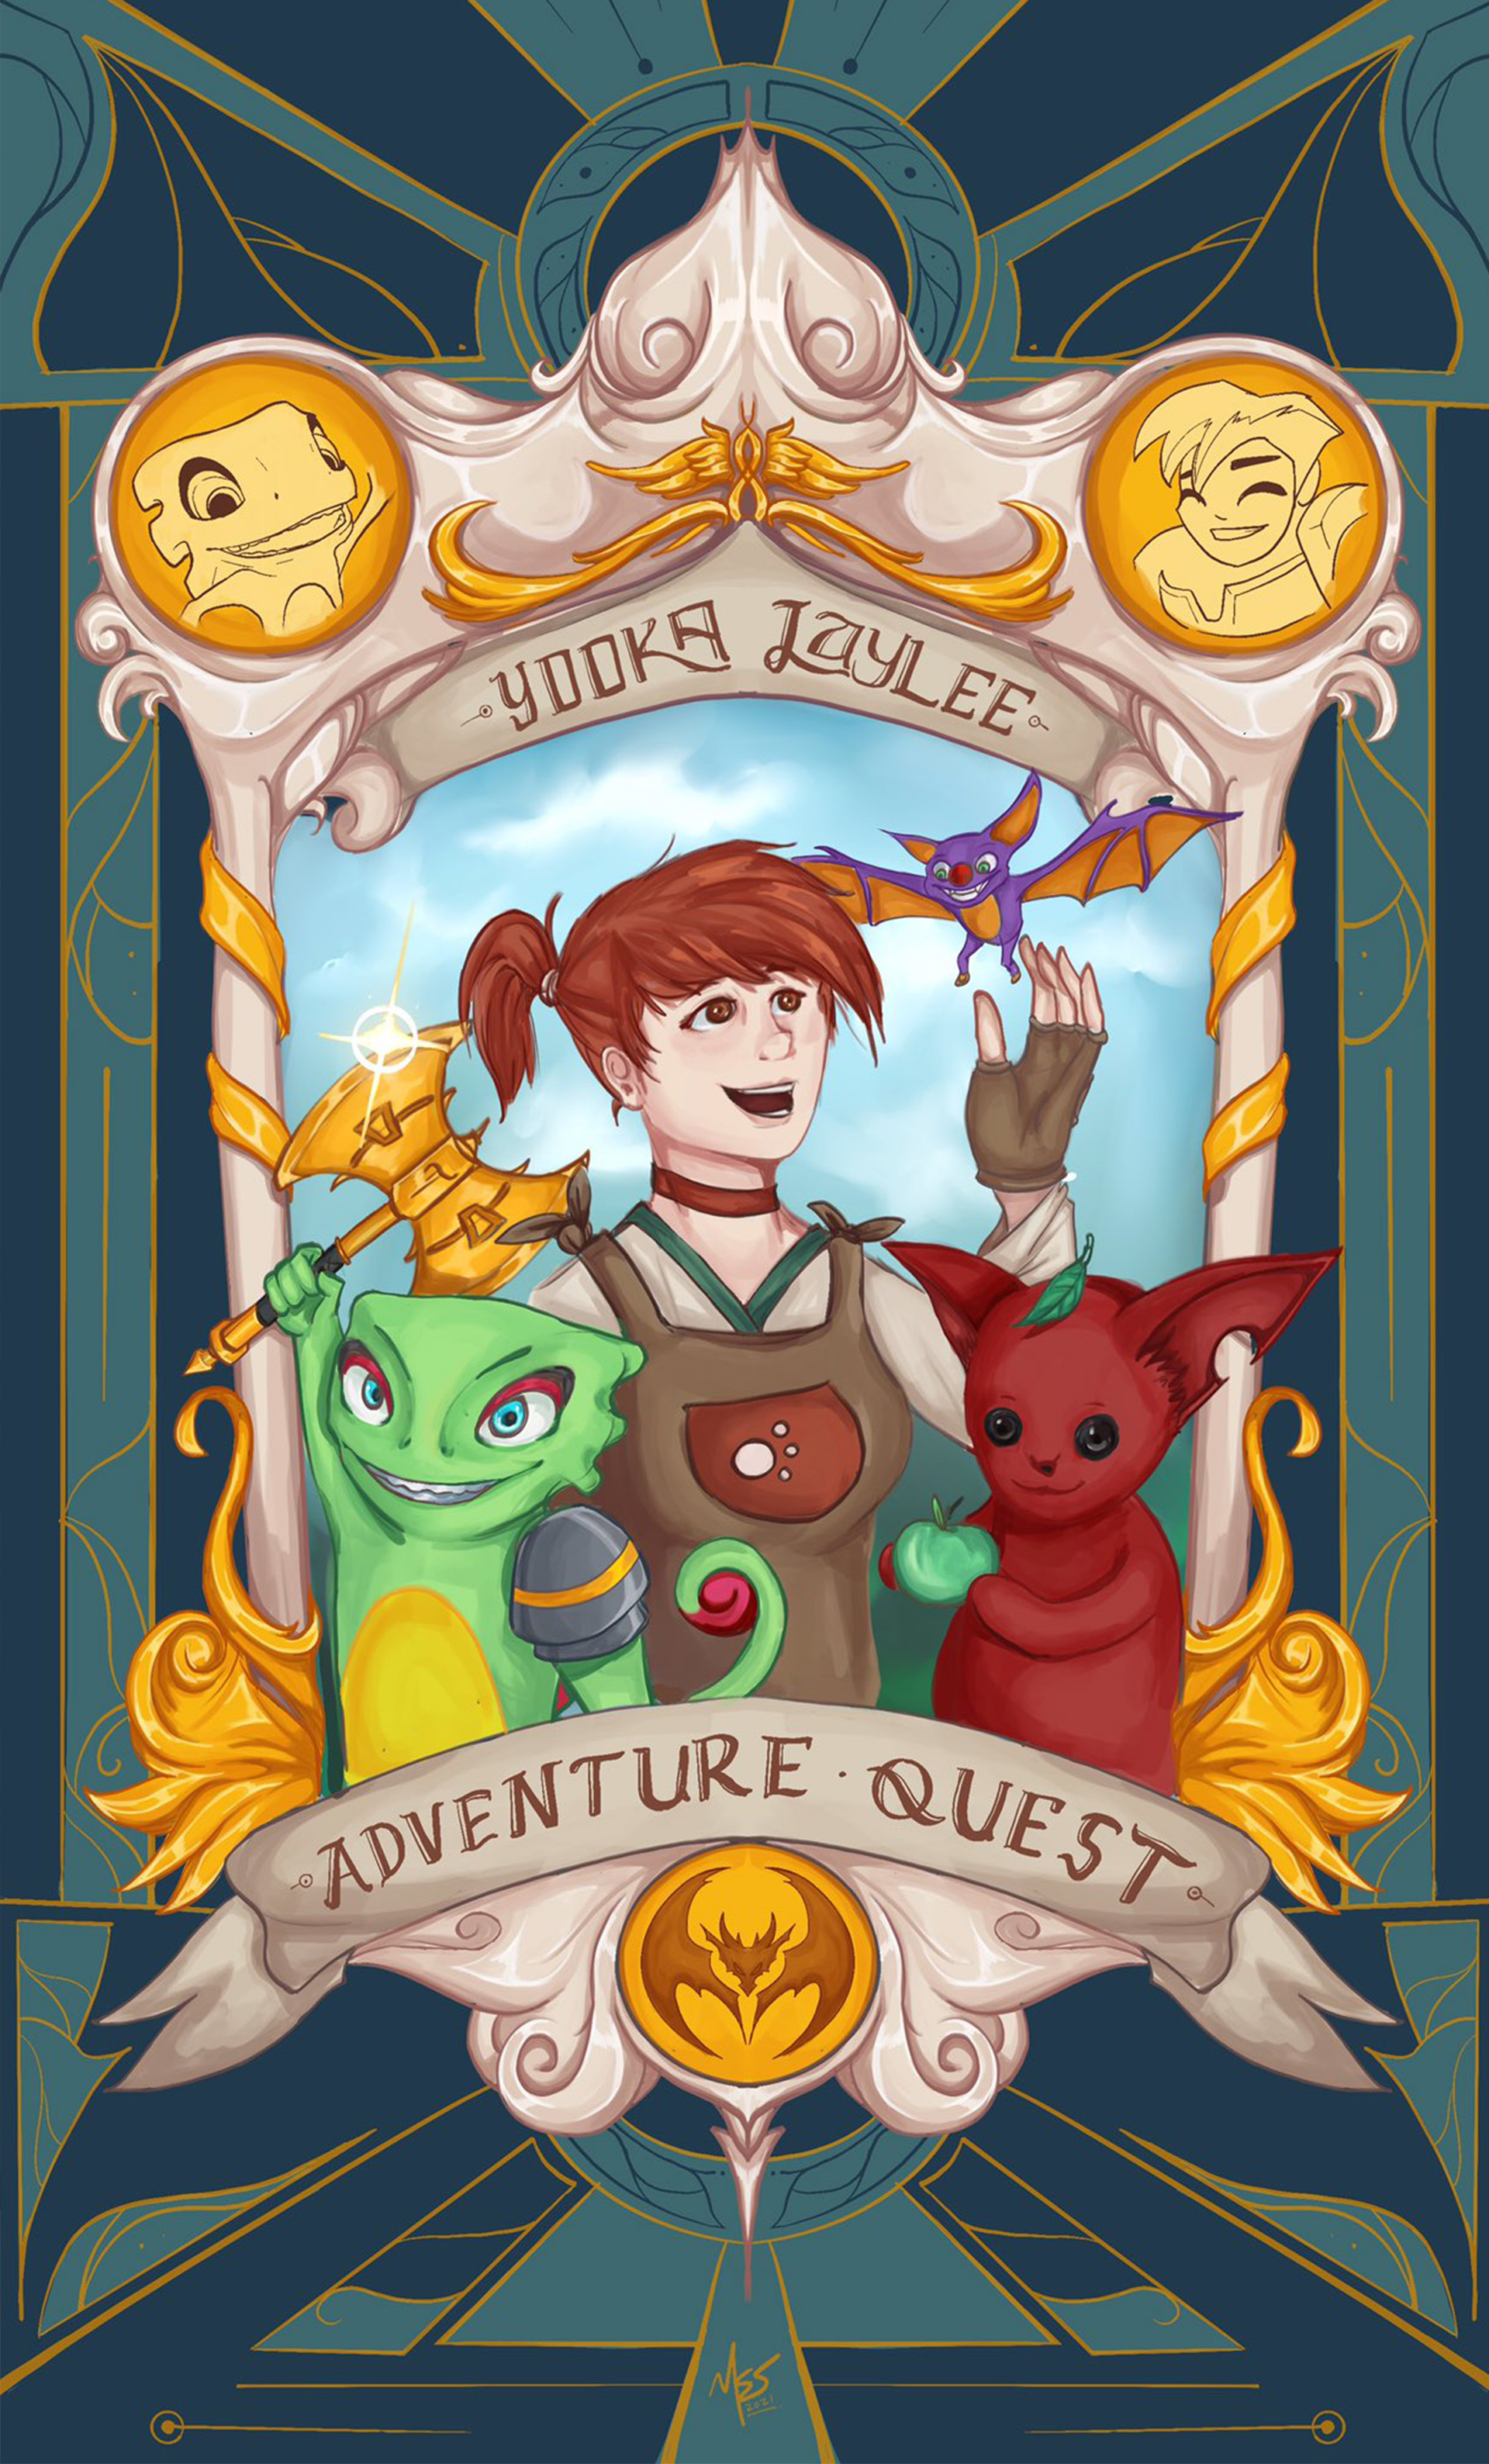 AdventureQuest Worlds - UPDATE: THE CONTEST HAS ENDED! Prizes will be  awarded on 3.22.2016 Alina here with a surprise Lucky Day 2016: FREE  AdventureCoins contest! This weekend's colors is gold (thanks,  Sneevilchauns!)